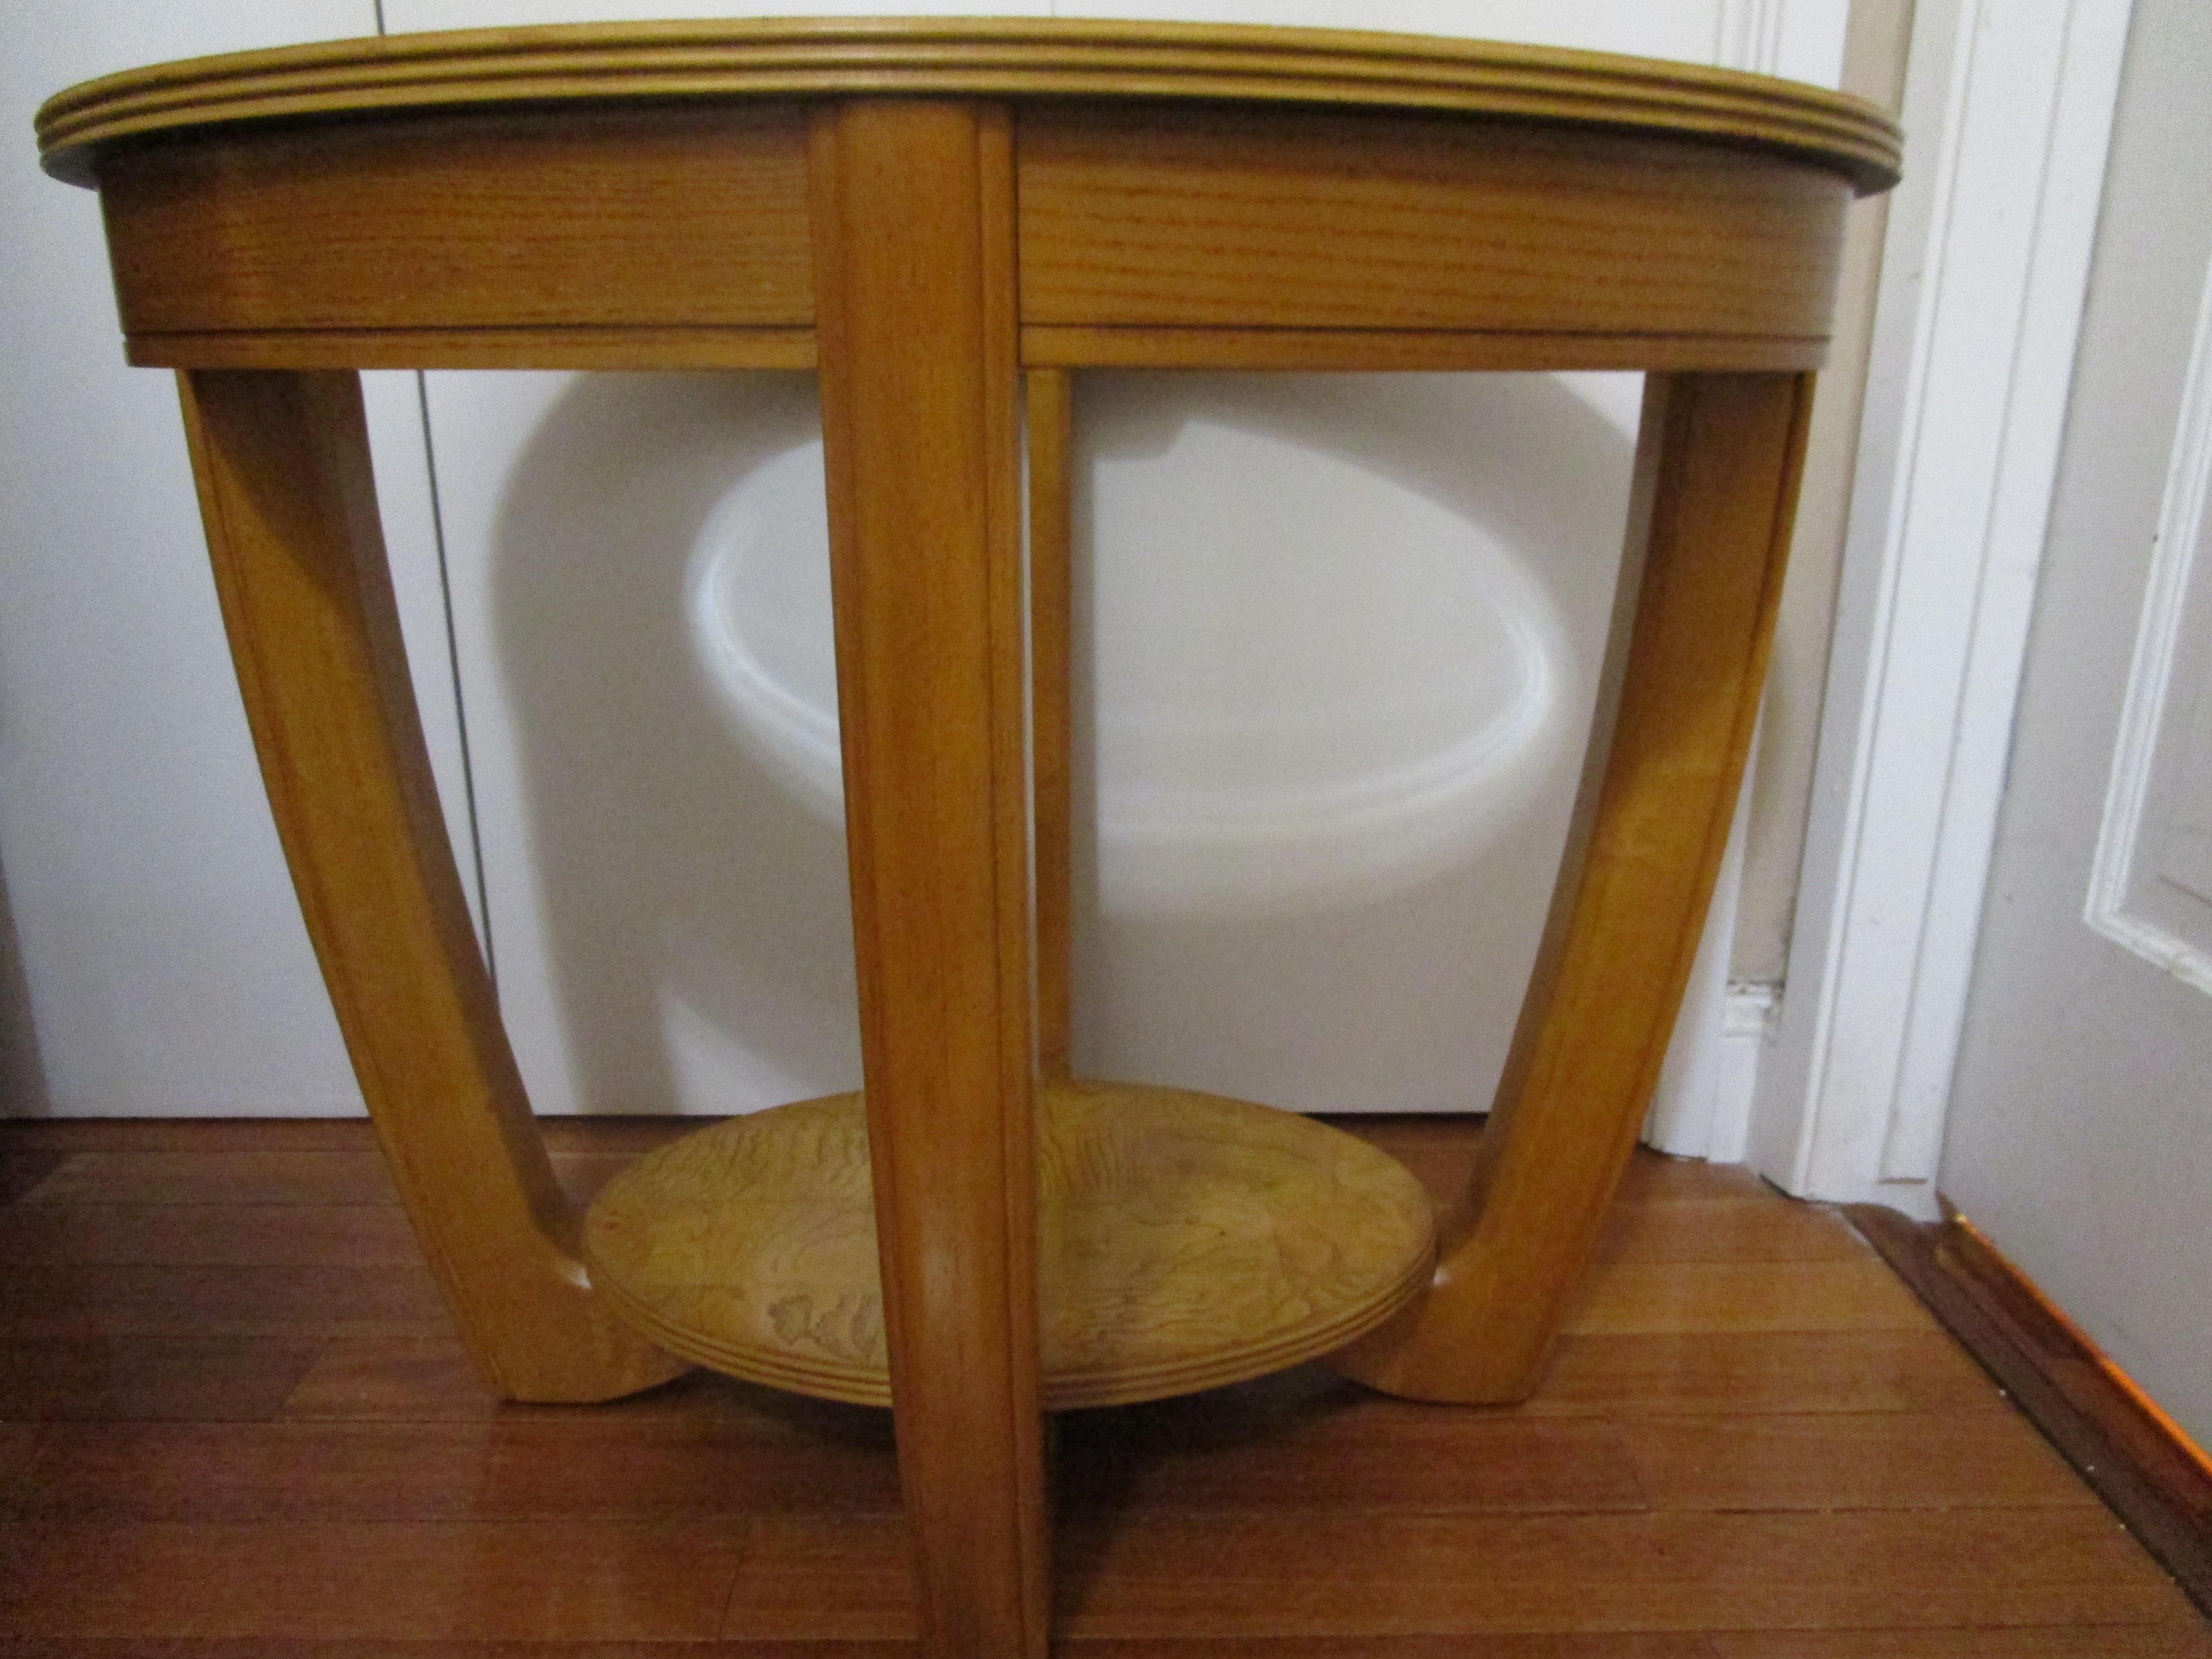  Art Deco Style Oval Elm Coffee Table In Good Condition For Sale In Lomita, CA